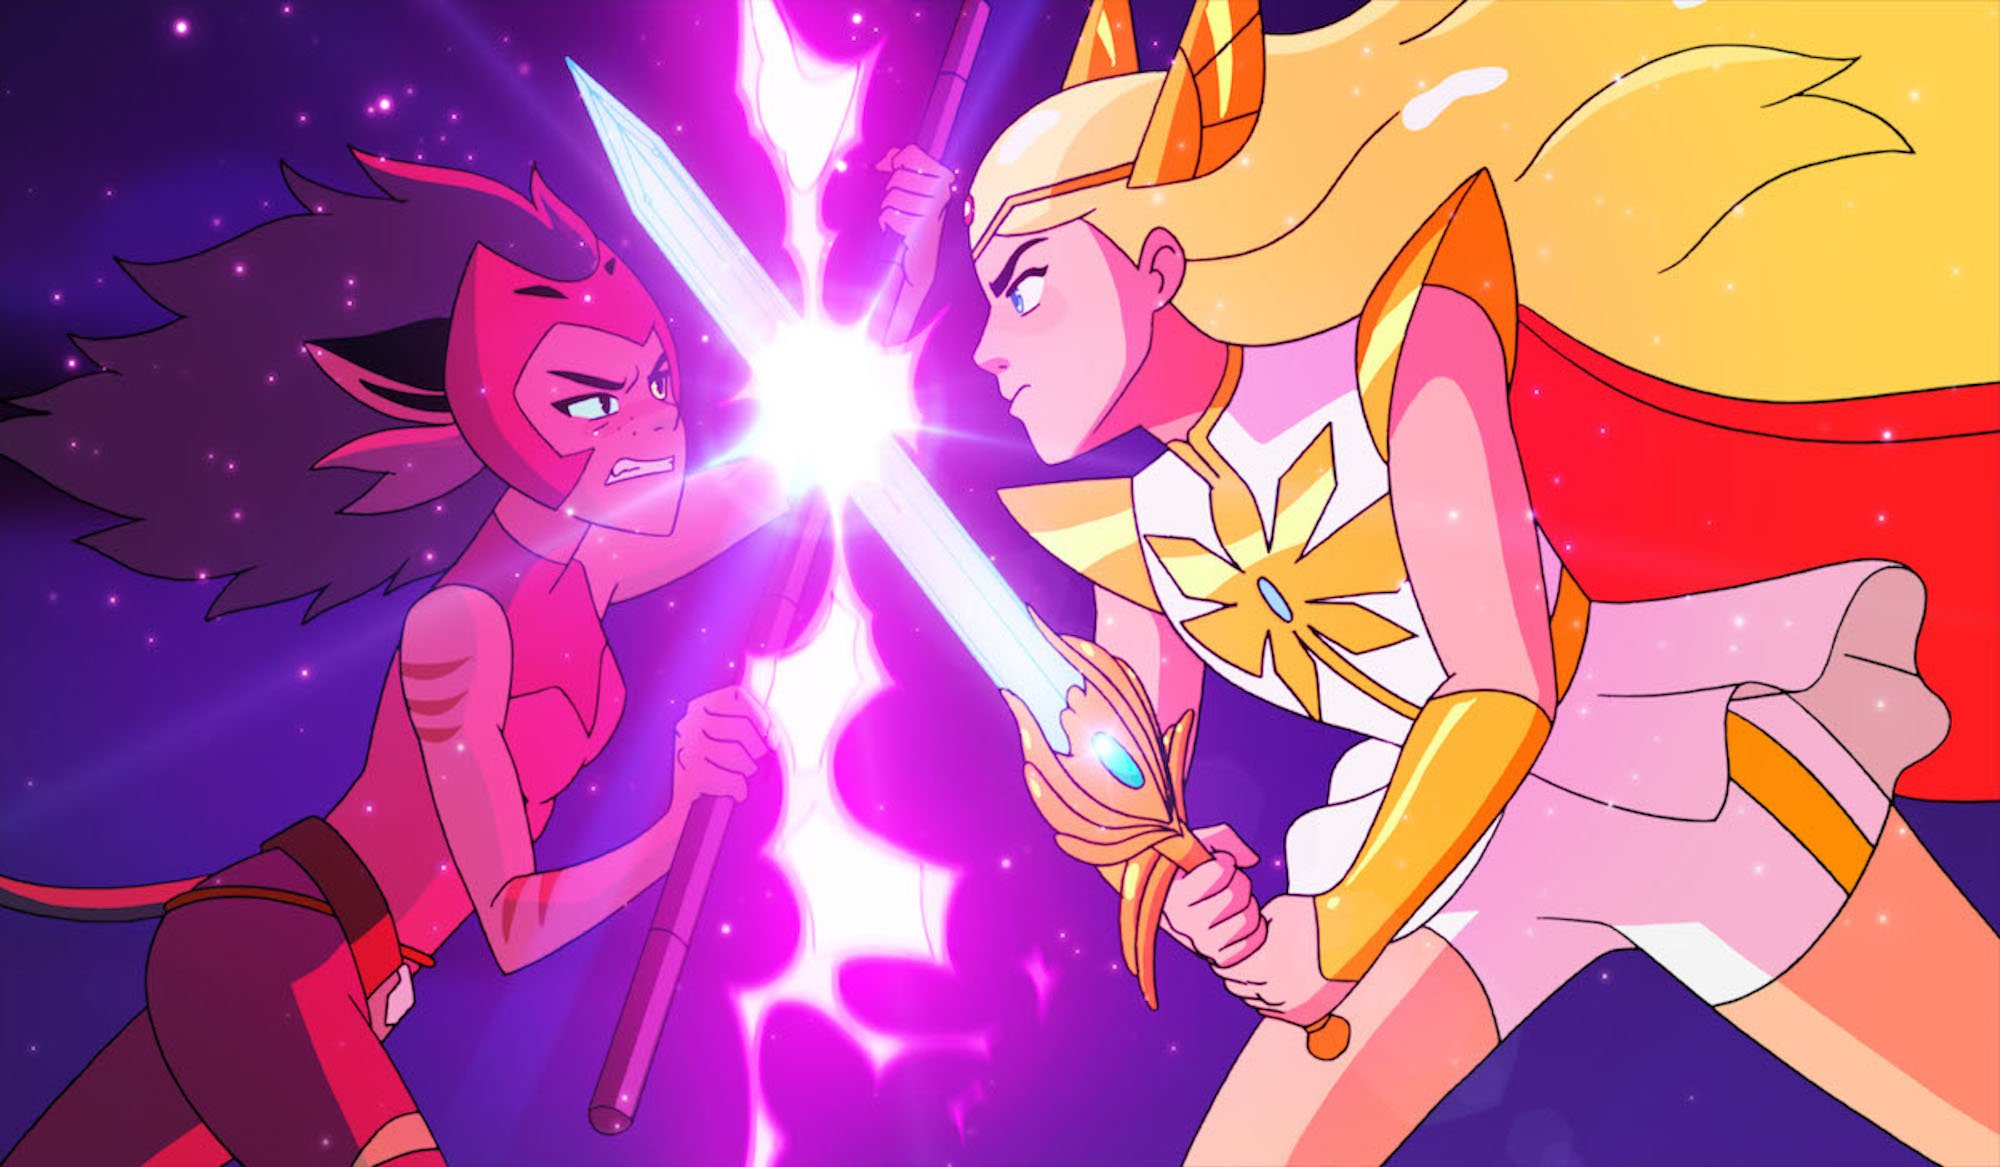 Catra and Adora/She-Ra face off in the opening theme for 'She-Ra and the Princesses of Power'